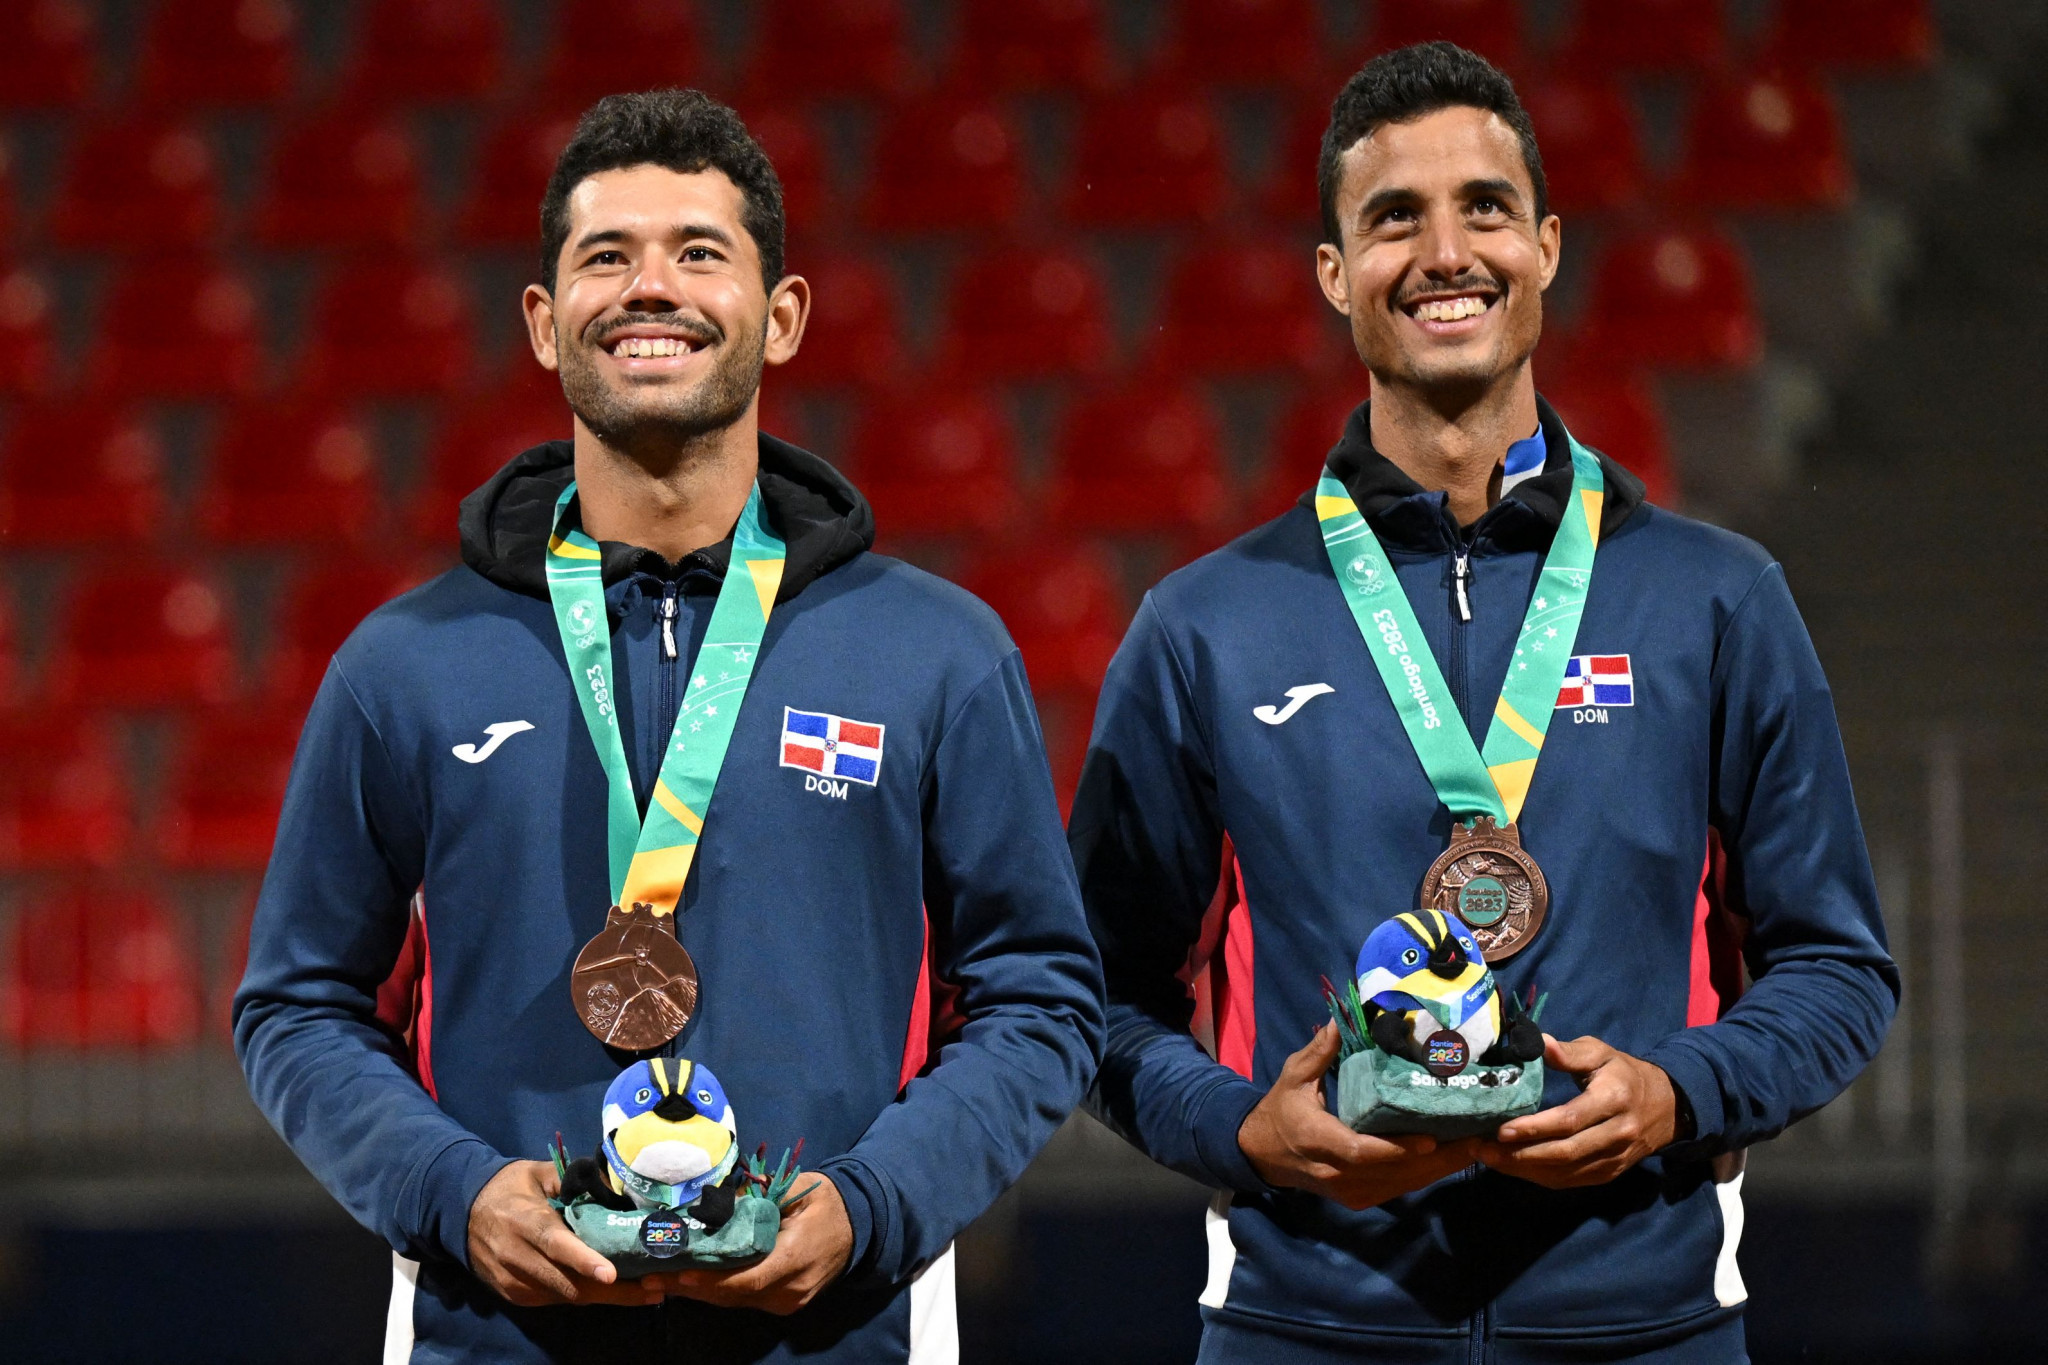 Nick Hardt and Roberto Cid of the Dominican Republic earned bronze by edging a close encounter against Costa Rica's Rodrigo Crespo and Jesse Flores ©Getty Images
